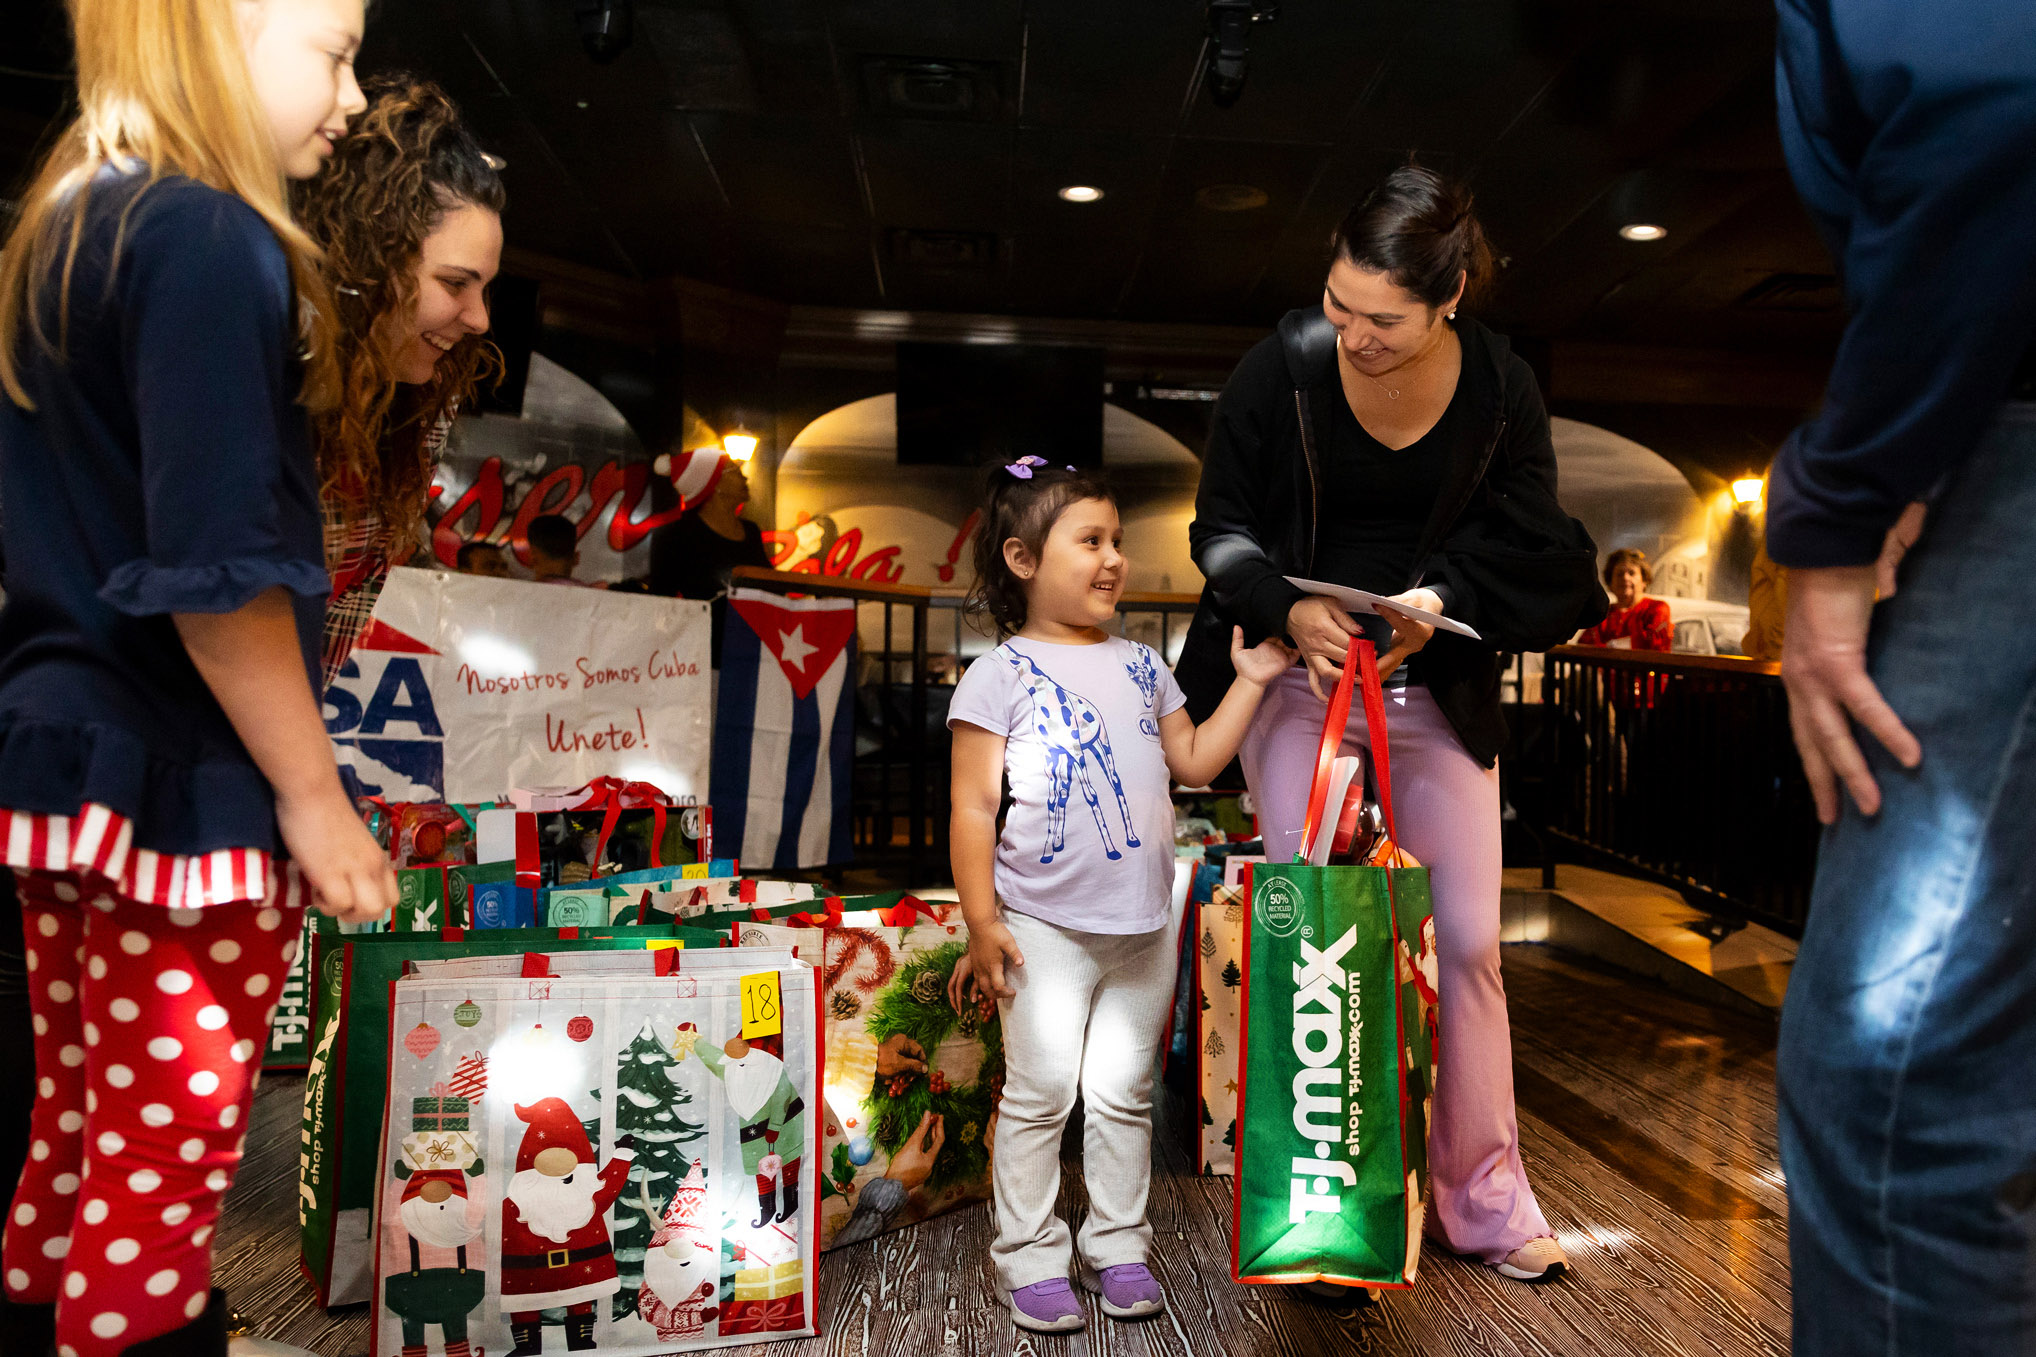 Delena Granados, 4, smiles with her mother, Maria, during a holiday toy giveaway hosted by Casa Cuba at Flor de Cuba restaurant on Saturday, Dec. 16, 2023, in Houston